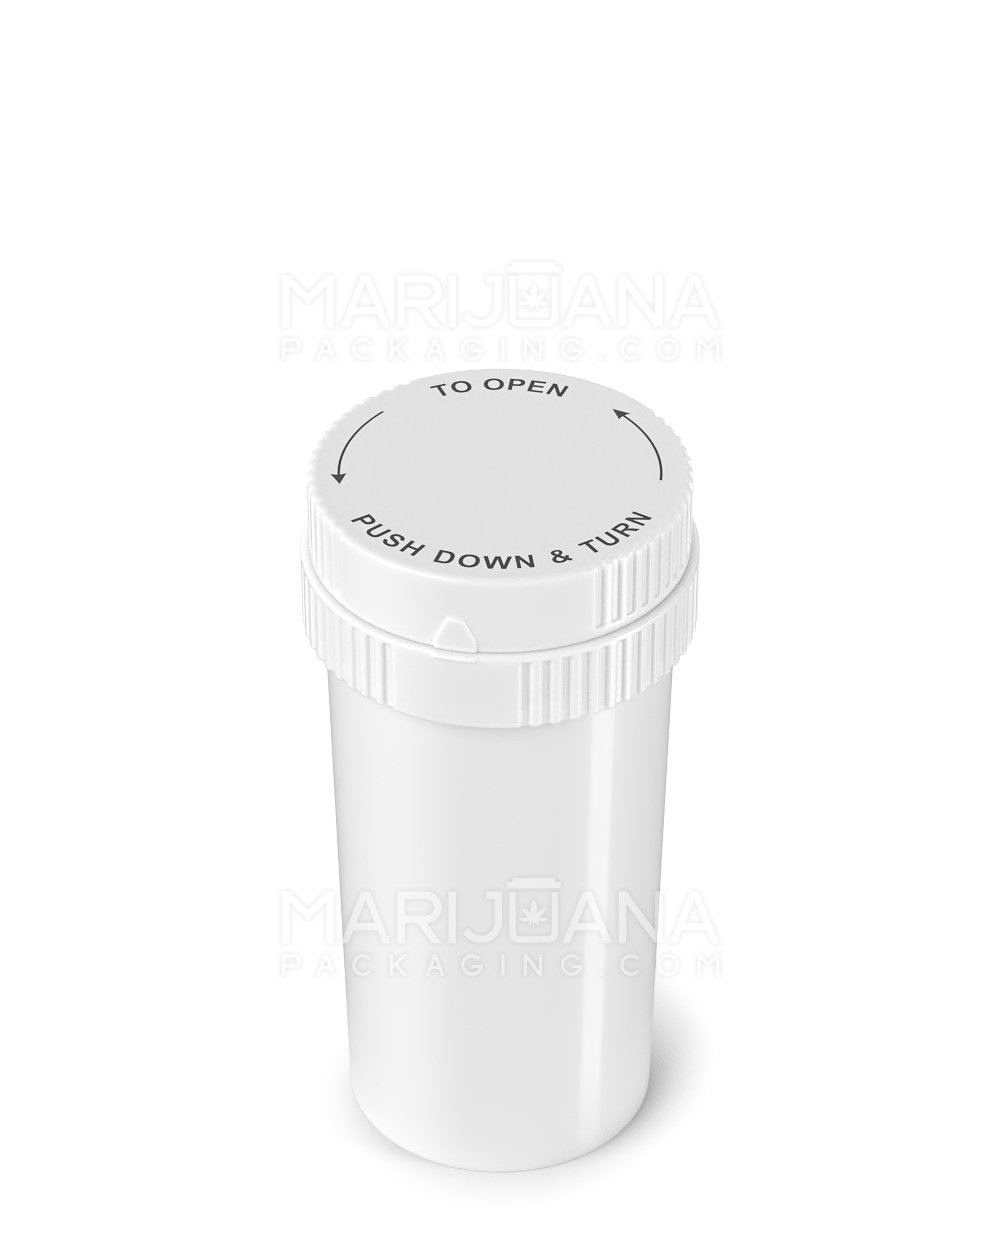 Child Resistant | Push & Turn Vial with Grinder Cap | 40dr - White Plastic - 150 Count - 3